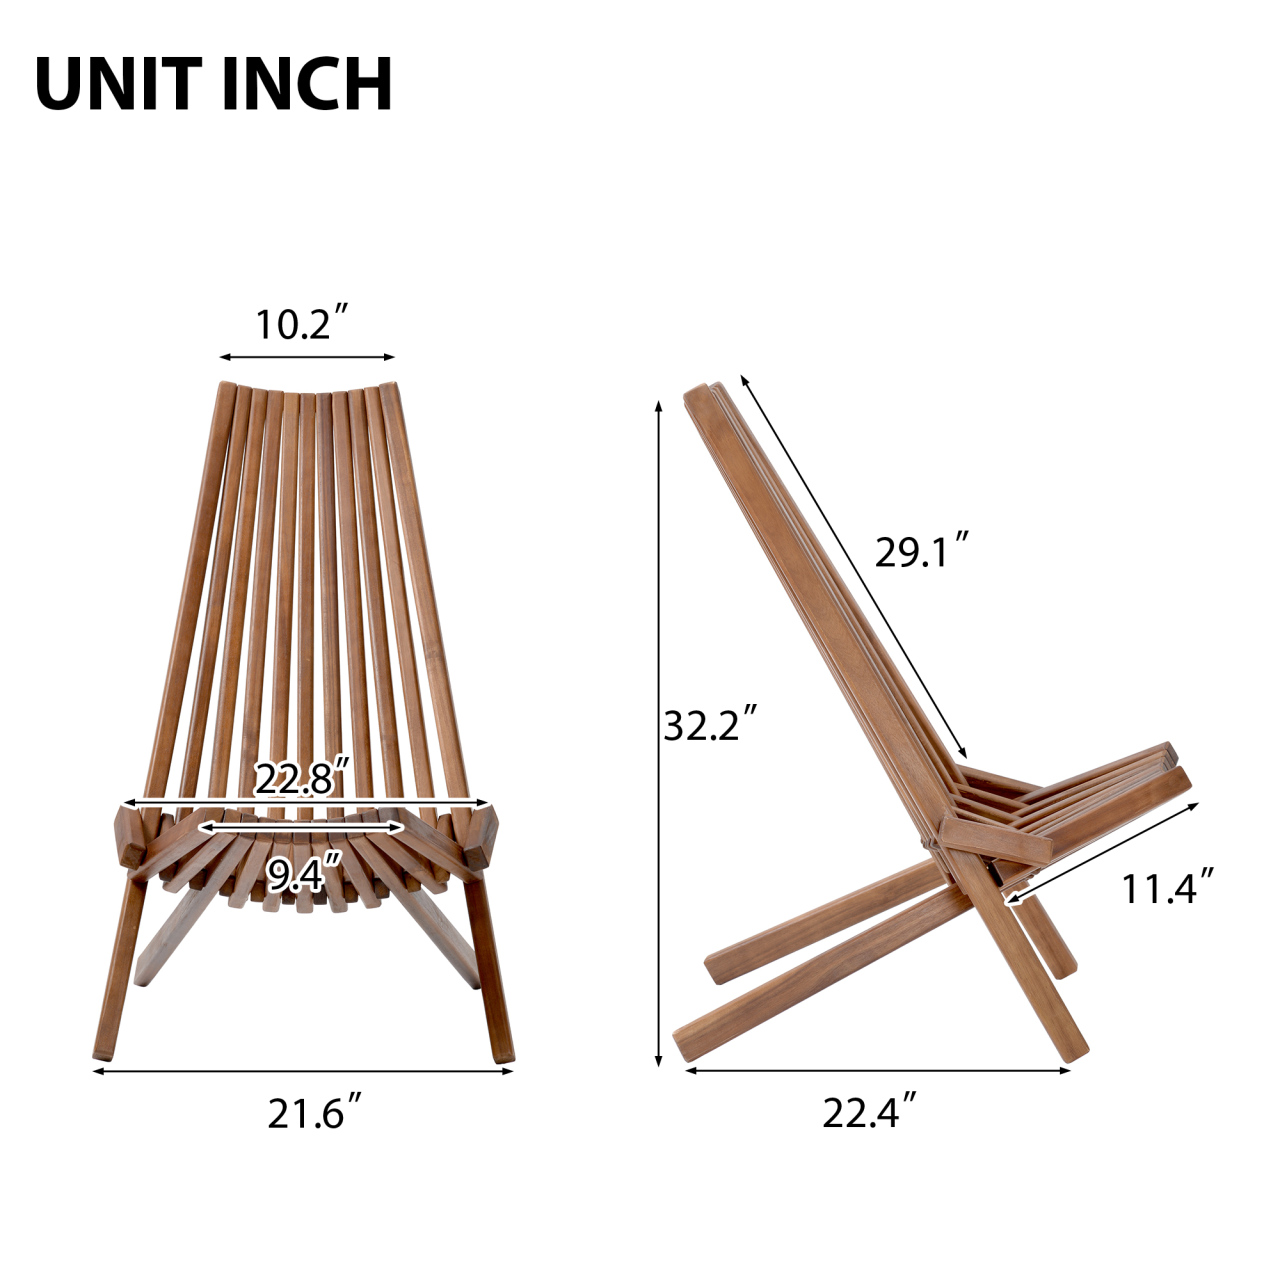 Folding Wood Chair Portable Chair with Ergonomic Seat and Tall Slanted Back, Outdoor/Indoor Chair Garden Chair Beach Chaise Lounge Chair Camping Recliner, Pool Chair Dining Chair - image 2 of 9